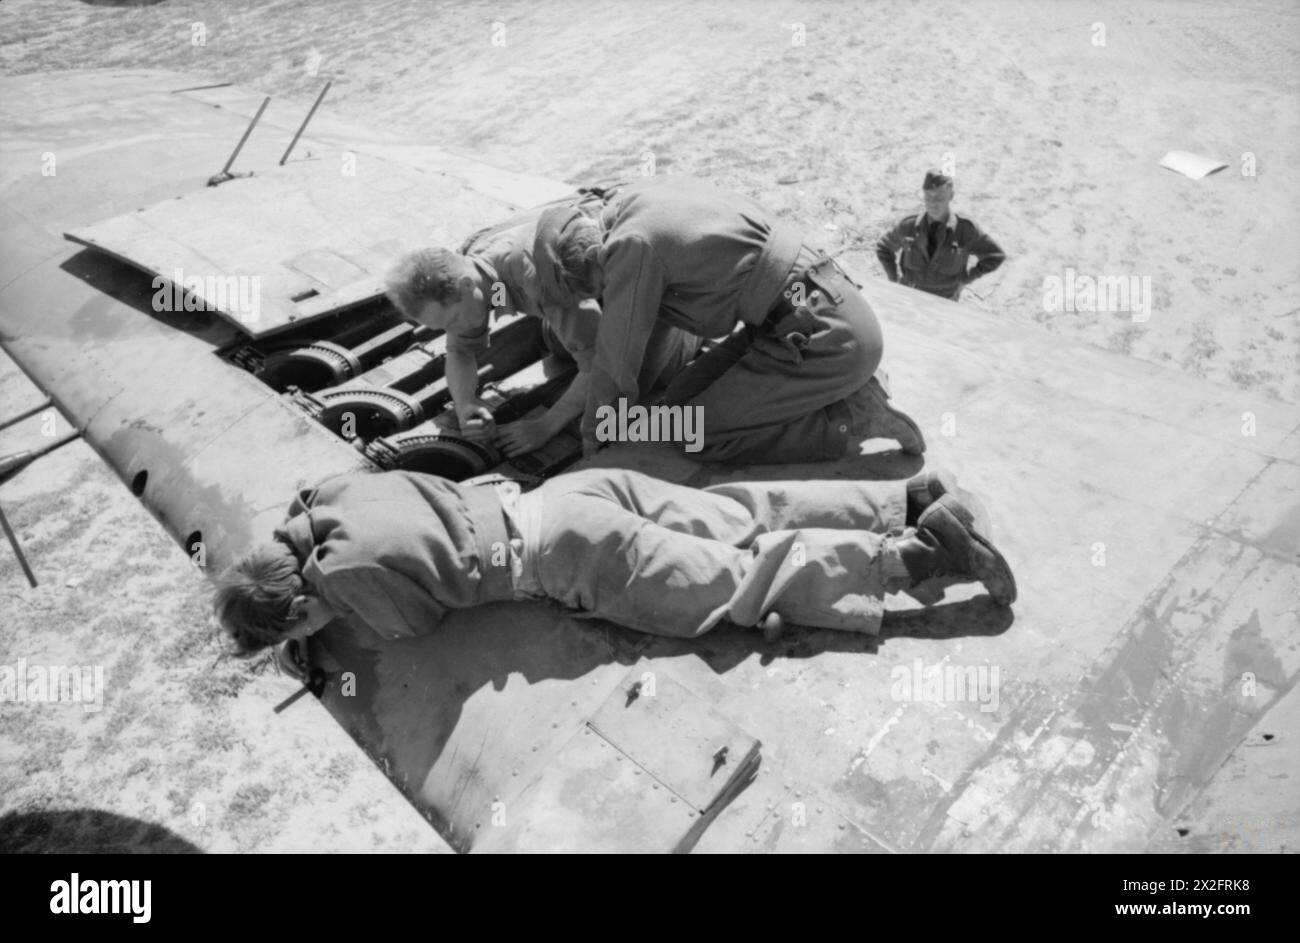 ROYAL AIR FORCE OPERATIONS IN THE MIDDLE EAST AND NORTH AFRICA, 1939-1943. - Armourers of No. 89 Squadron RAF installing a .303 Browning machine gun in the wing of a Bristol Beaufighter Mark VIF at Castel Benito, Libya Royal Air Force, Royal Air Force Regiment, Sqdn, 89 Stock Photo